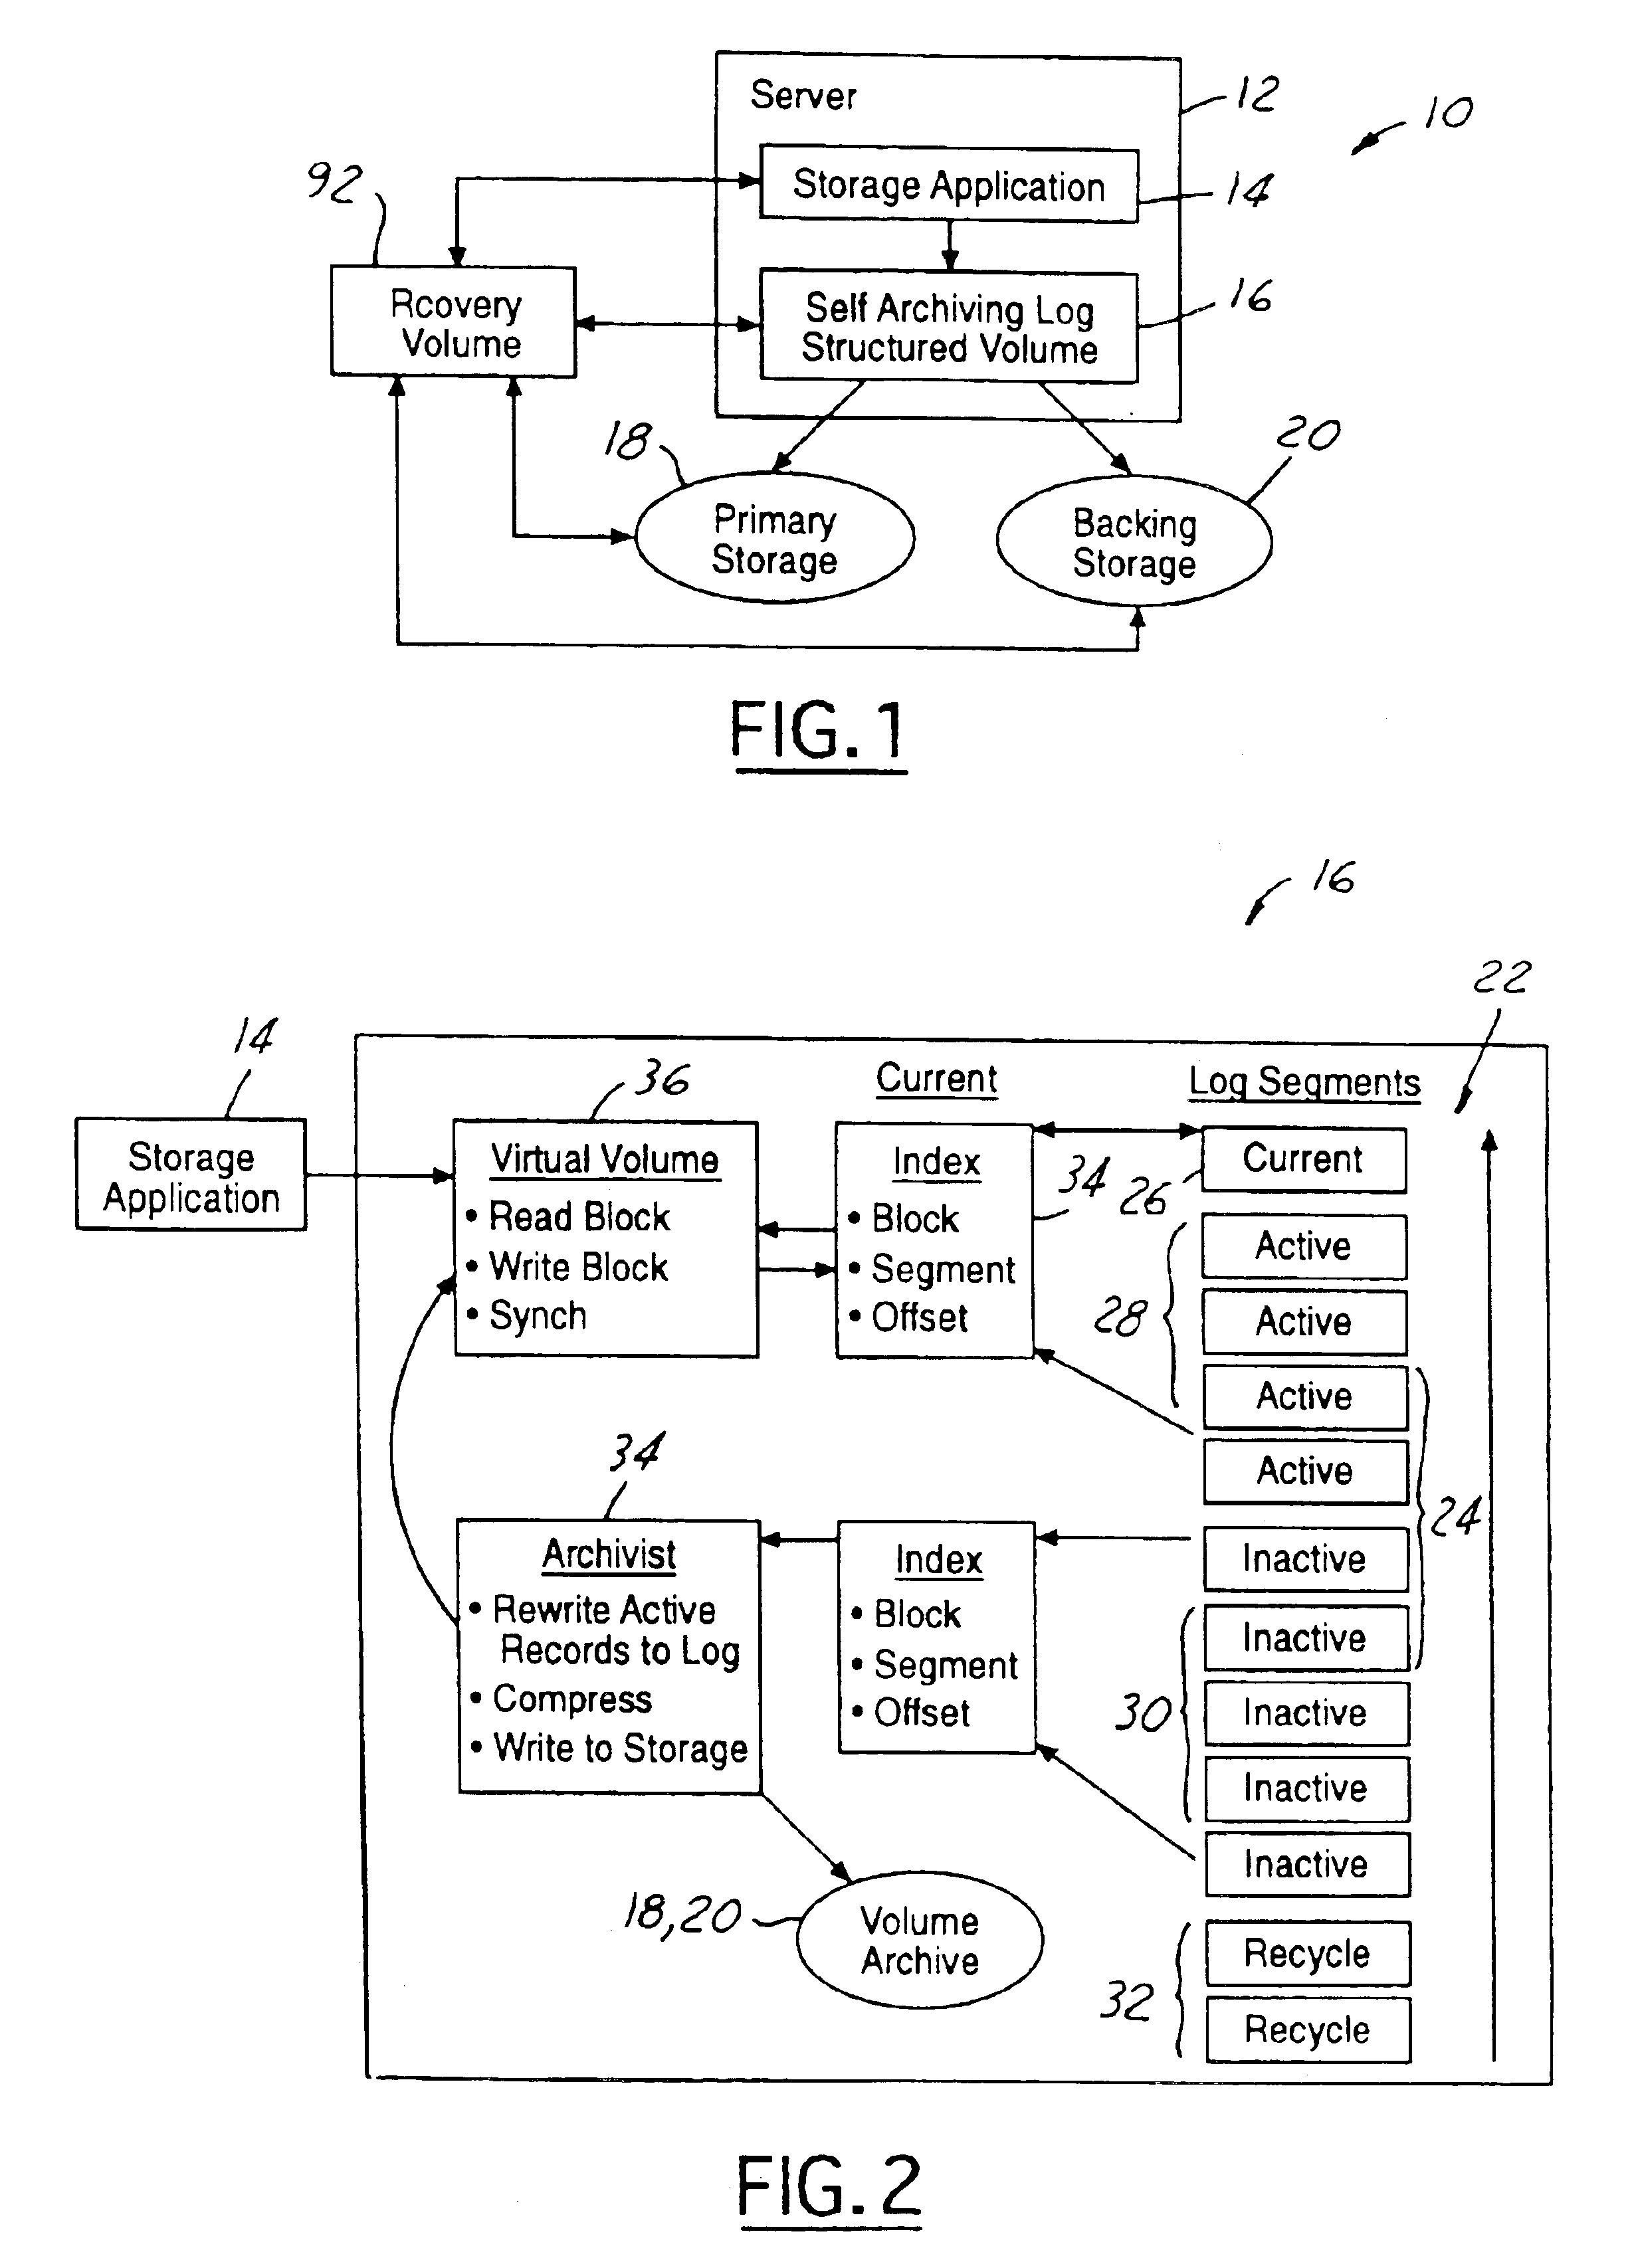 Self archiving log structured volume with intrinsic data protection